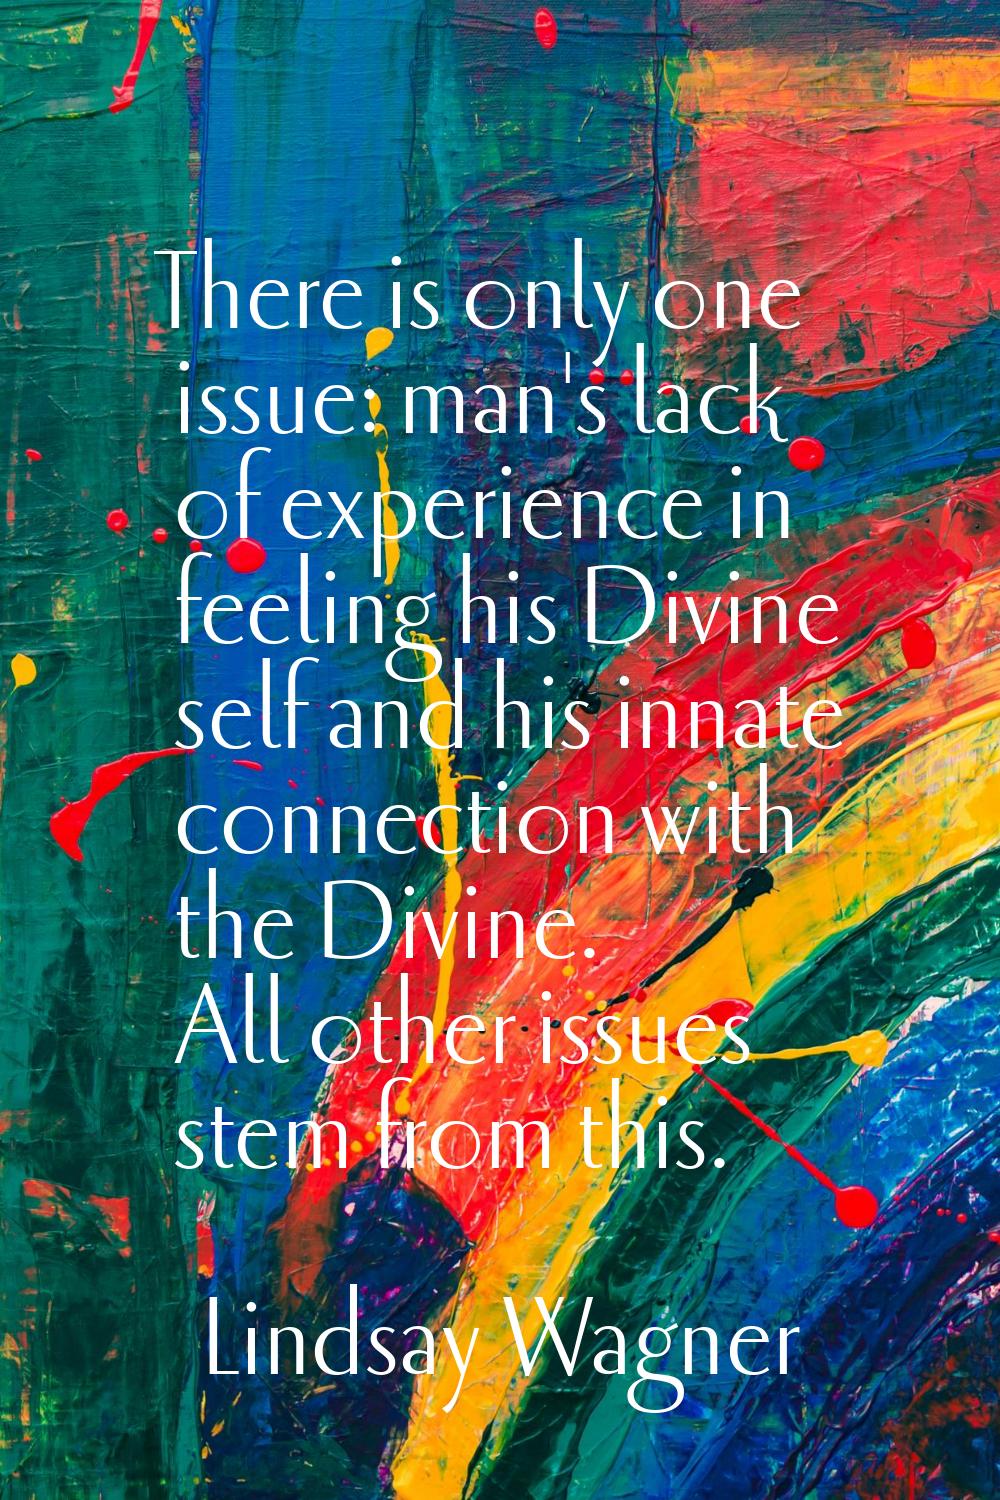 There is only one issue: man's lack of experience in feeling his Divine self and his innate connect